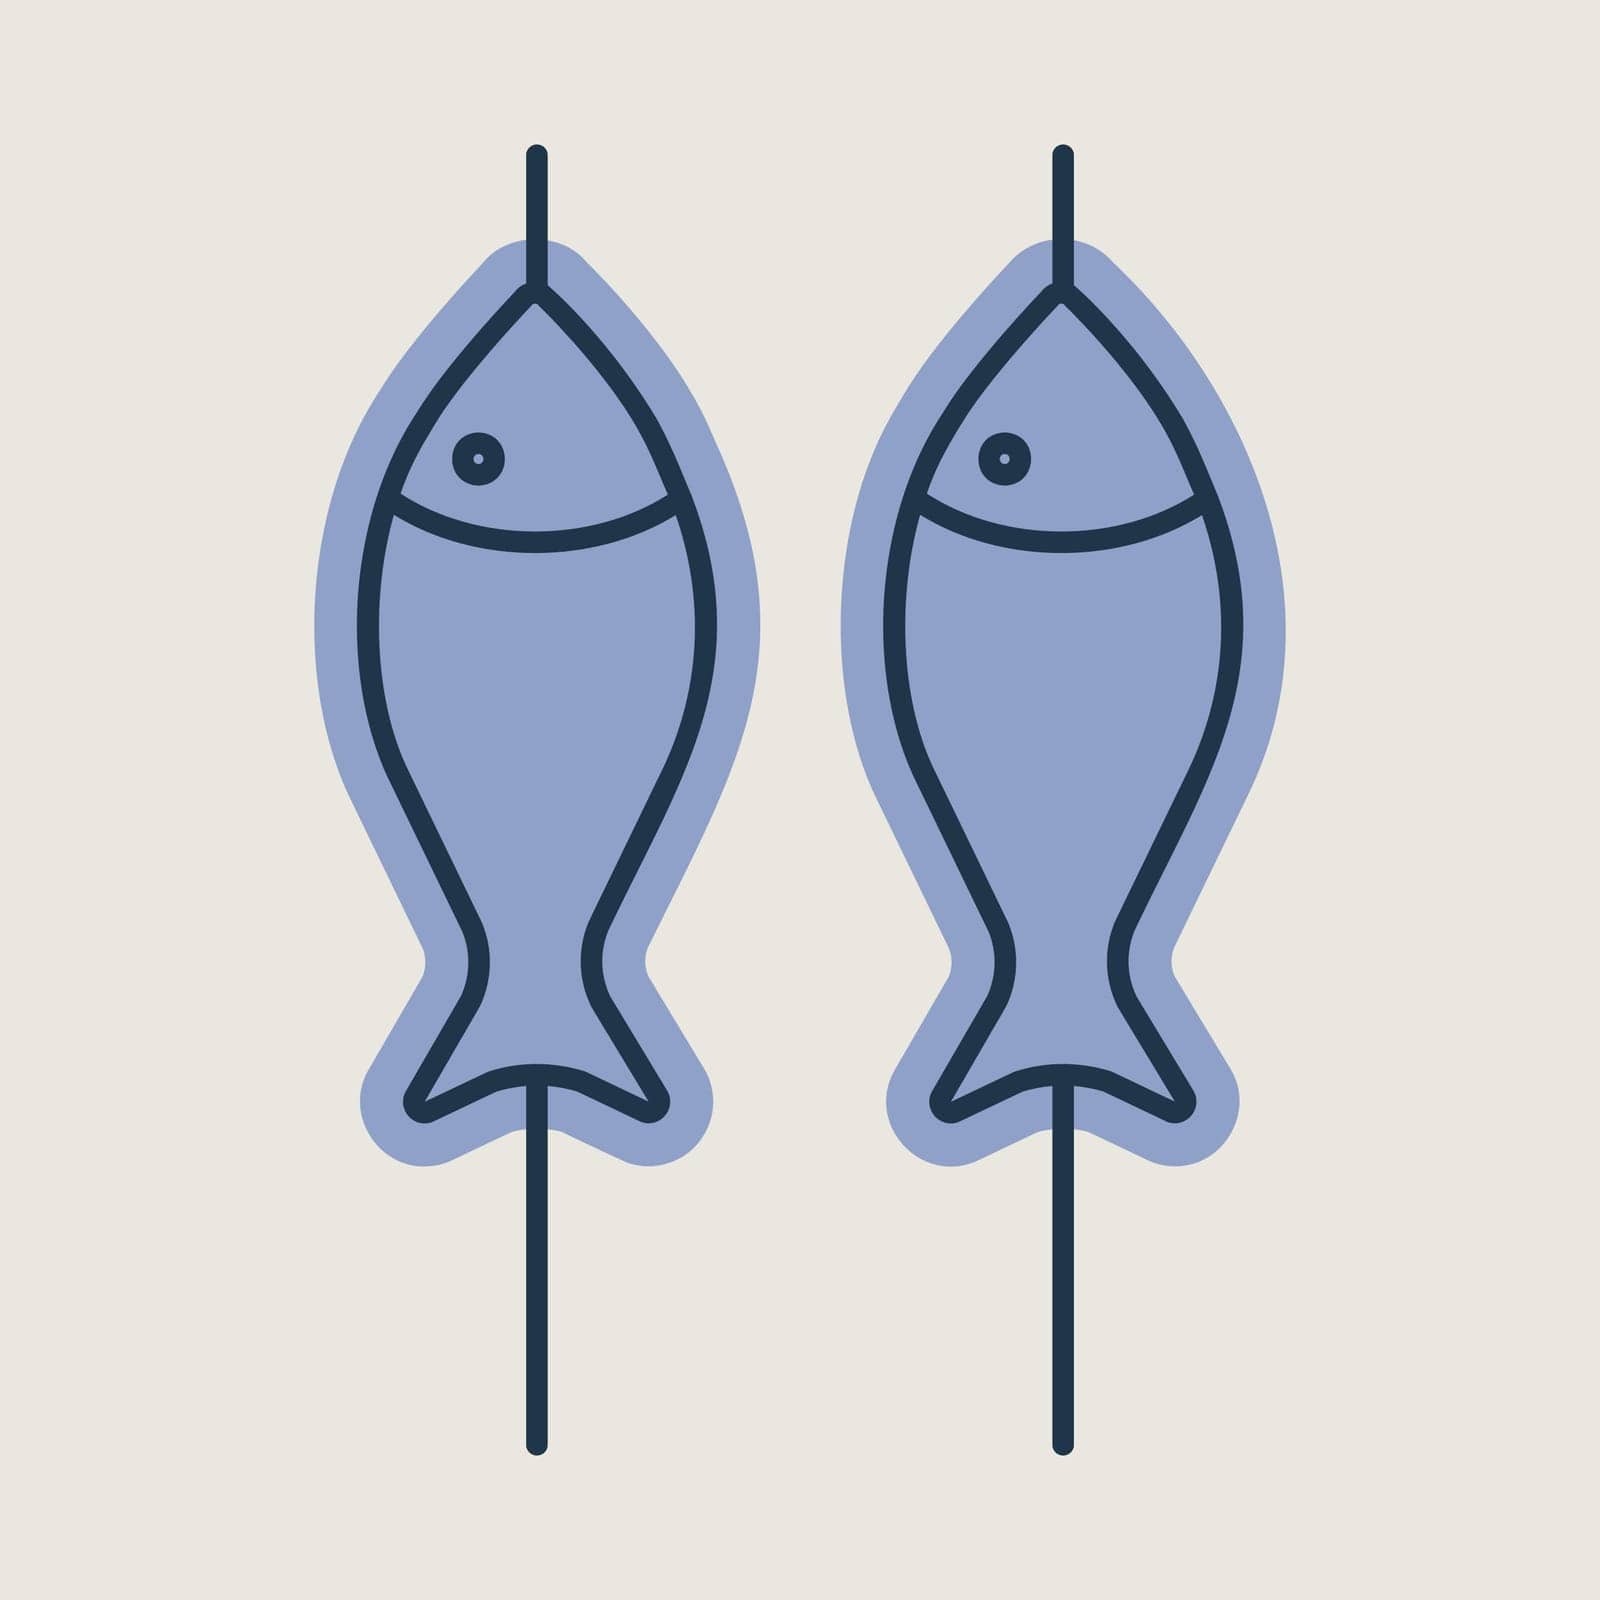 Fish roast on the barbecue grill vector icon. Graph symbol for cooking web site and apps design, logo, app, UI